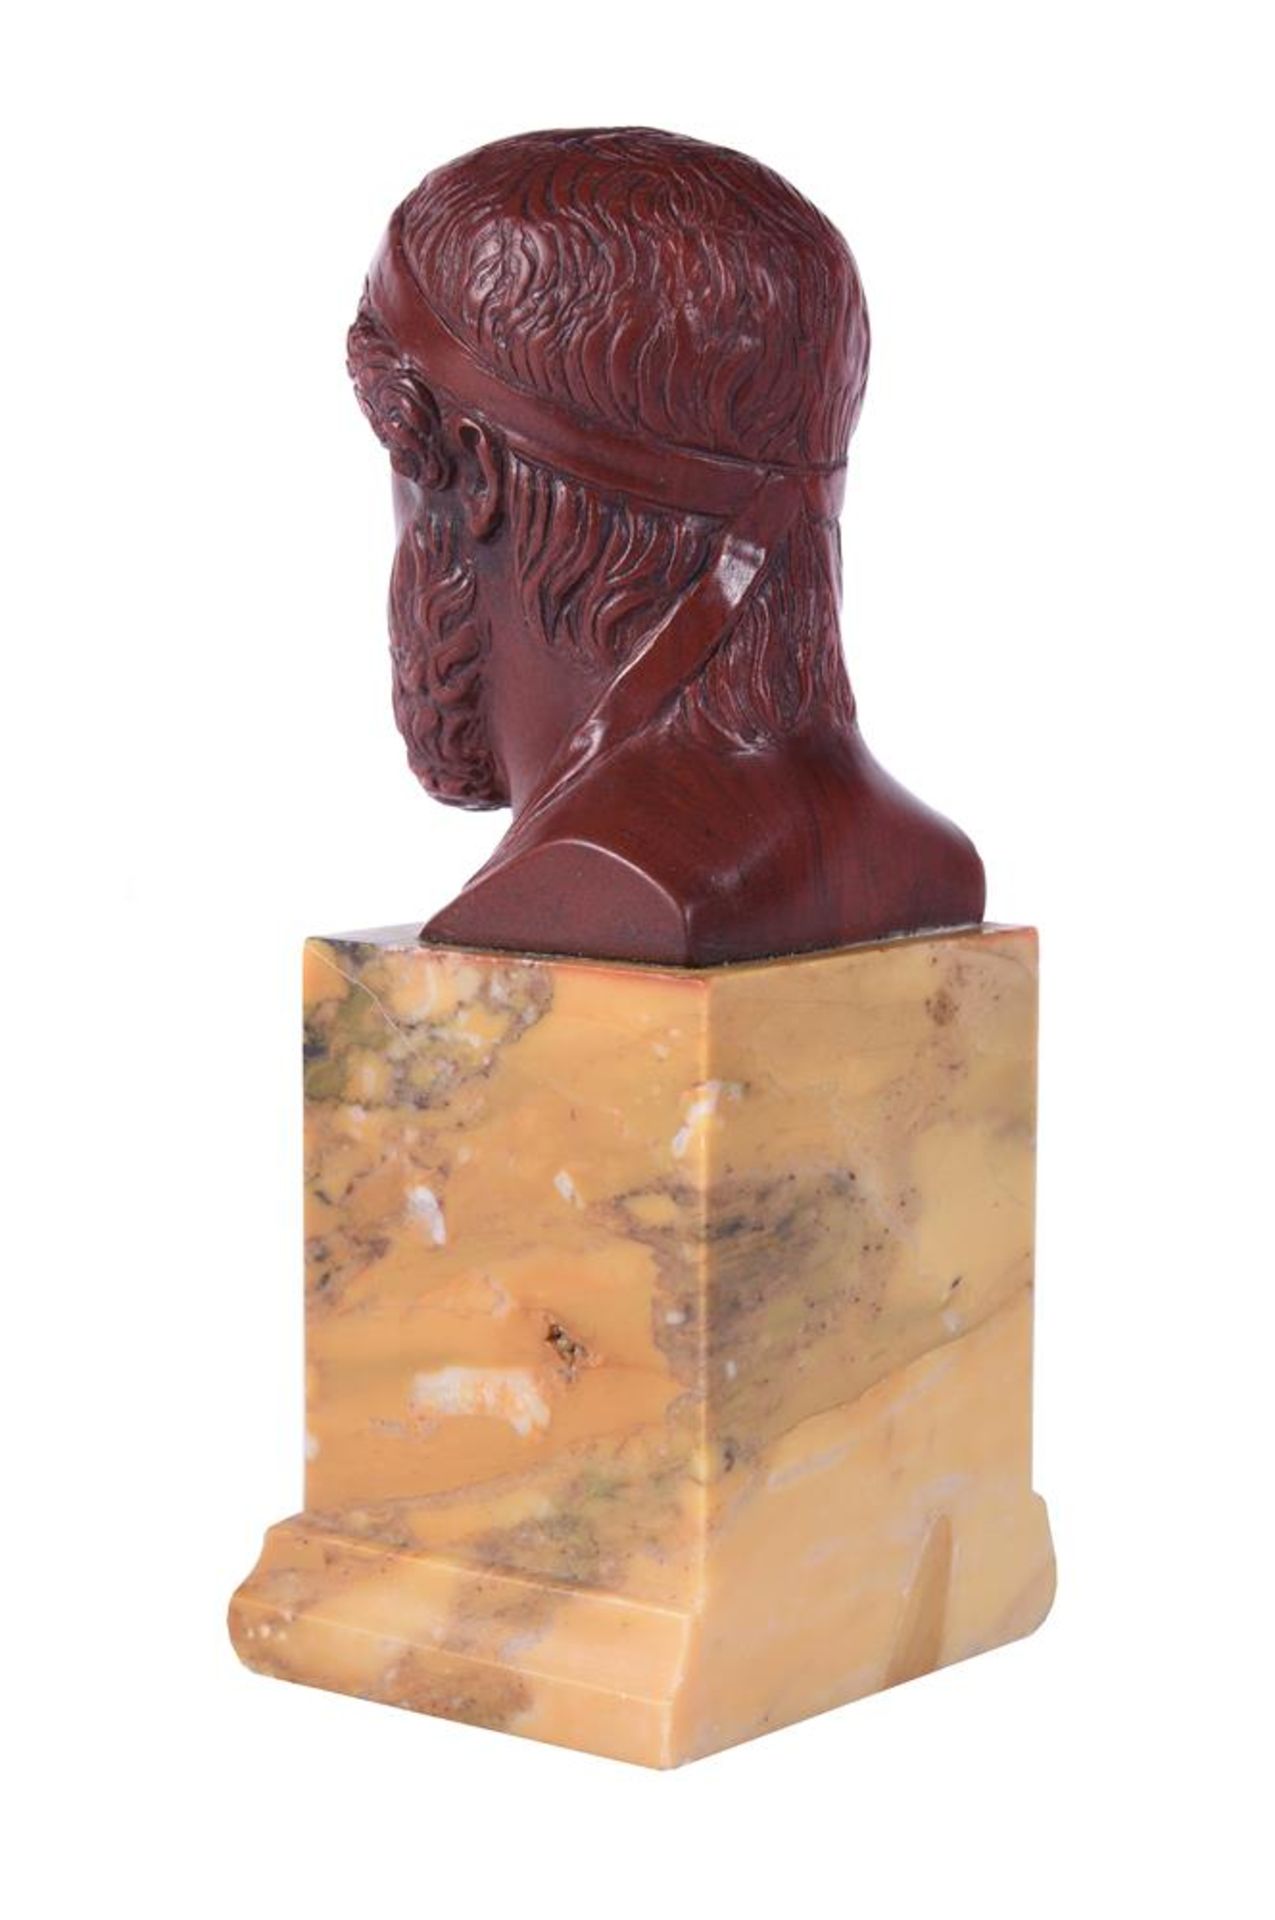 AFTER THE ANTIQUE, A 'GRAND TOUR' STYLE ROSSO ANTICO BUST OF PLATO, PROBABLY 20TH CENTURY - Image 3 of 4